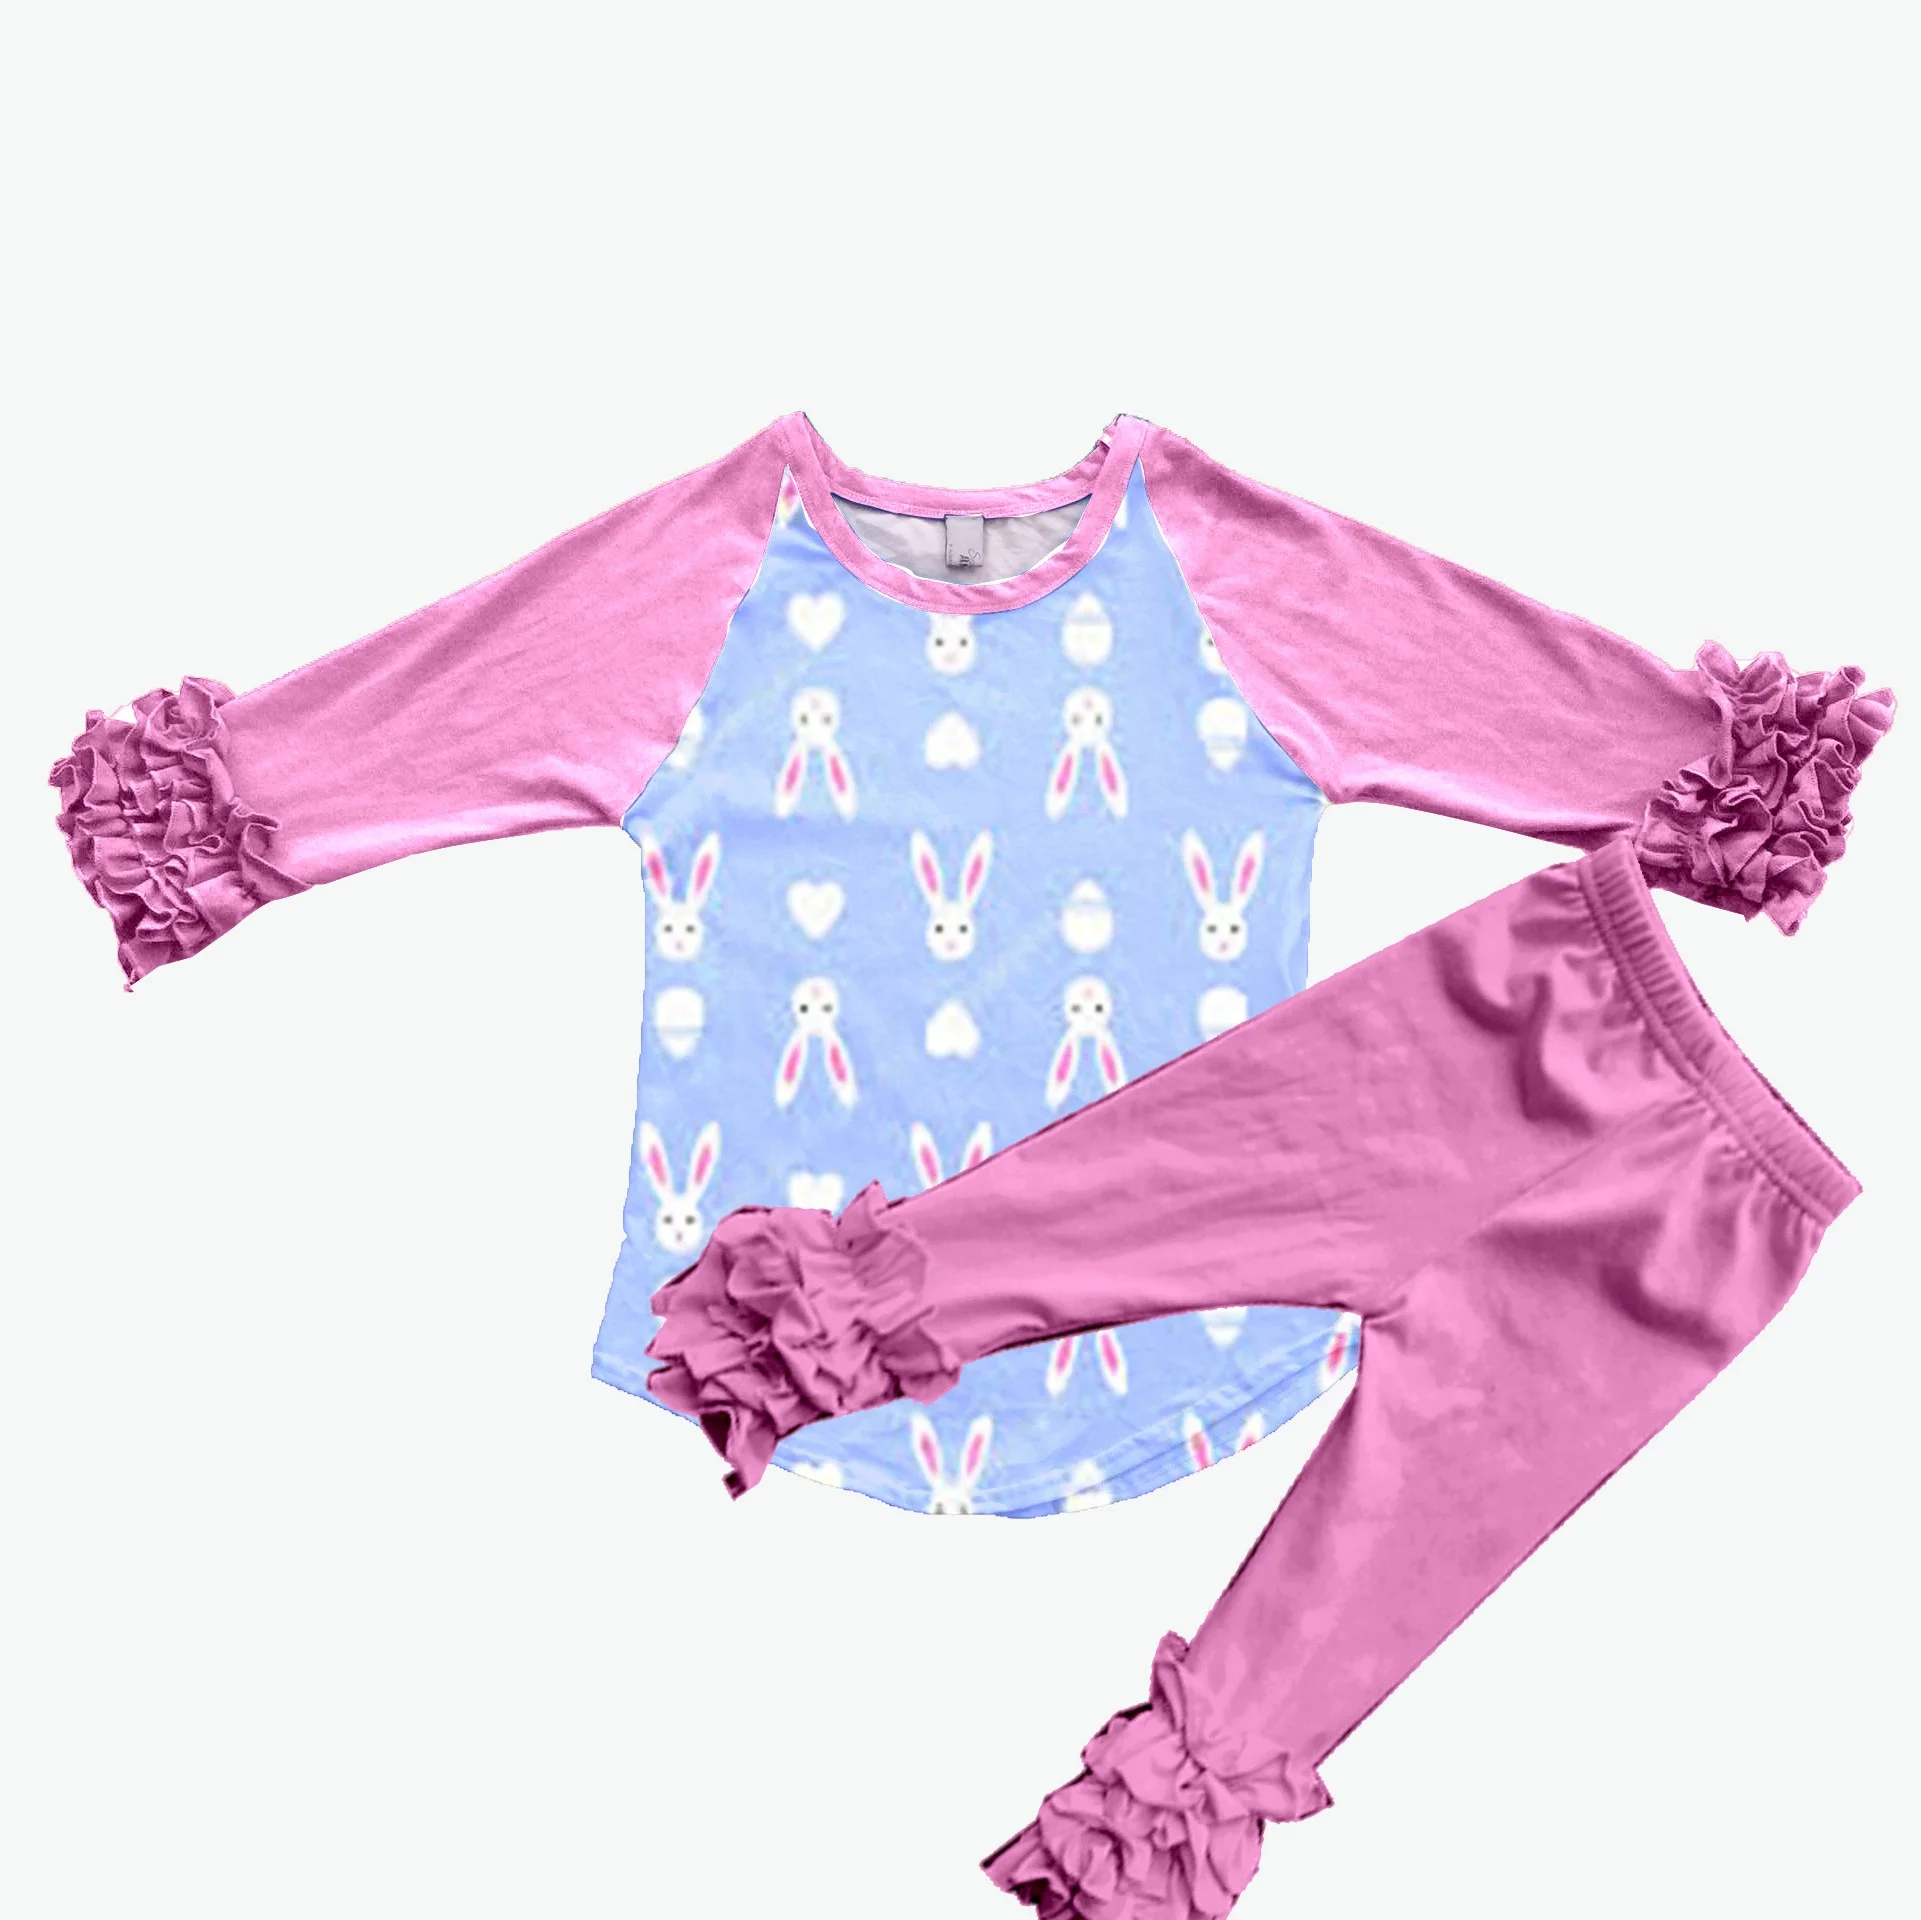 

YJ-109 Children baby clothing sets girl clothes girls boutique Easter ruflle raglan with icing ruffle pants outfits for kids, Picture show , you can contact us for more patterns